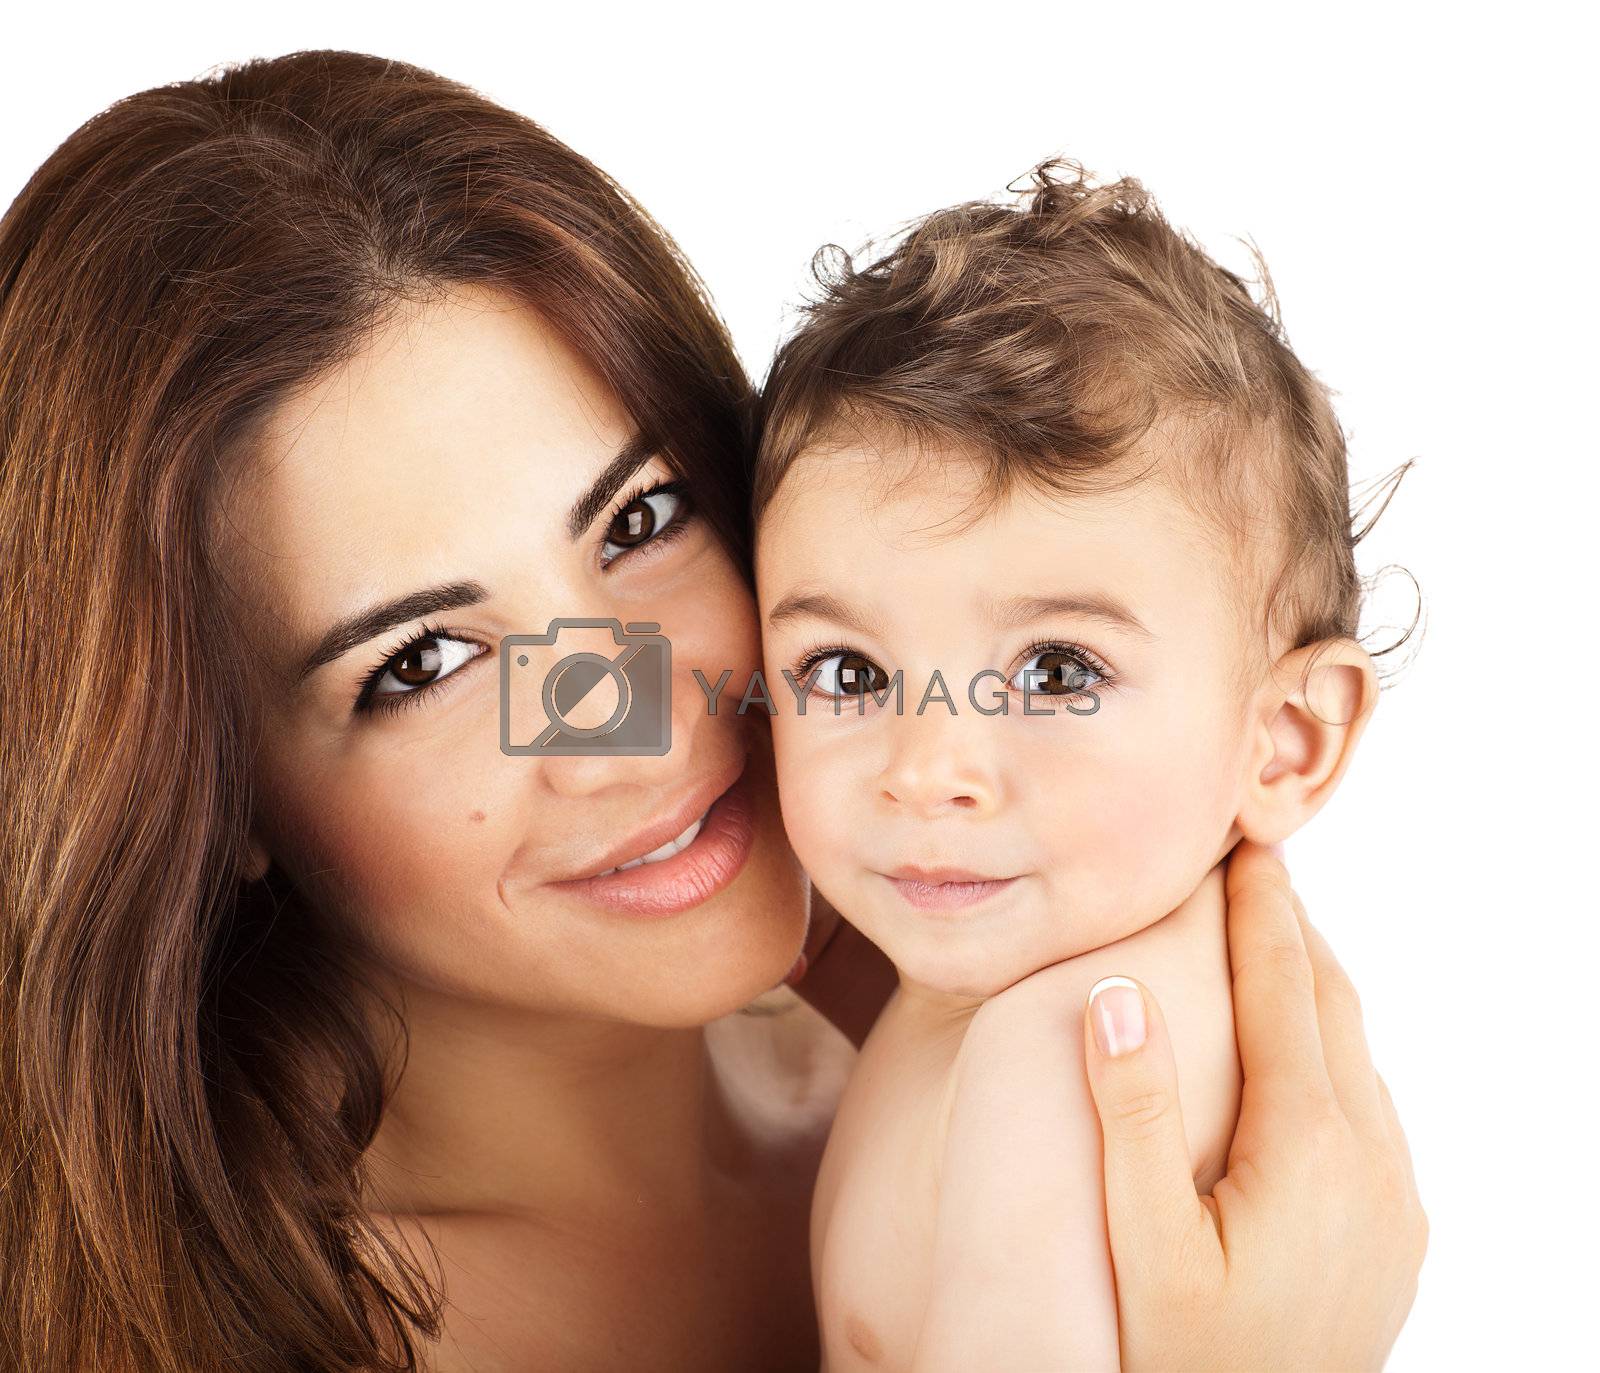 Royalty free image of Cute baby boy smiling with mother by Anna_Omelchenko